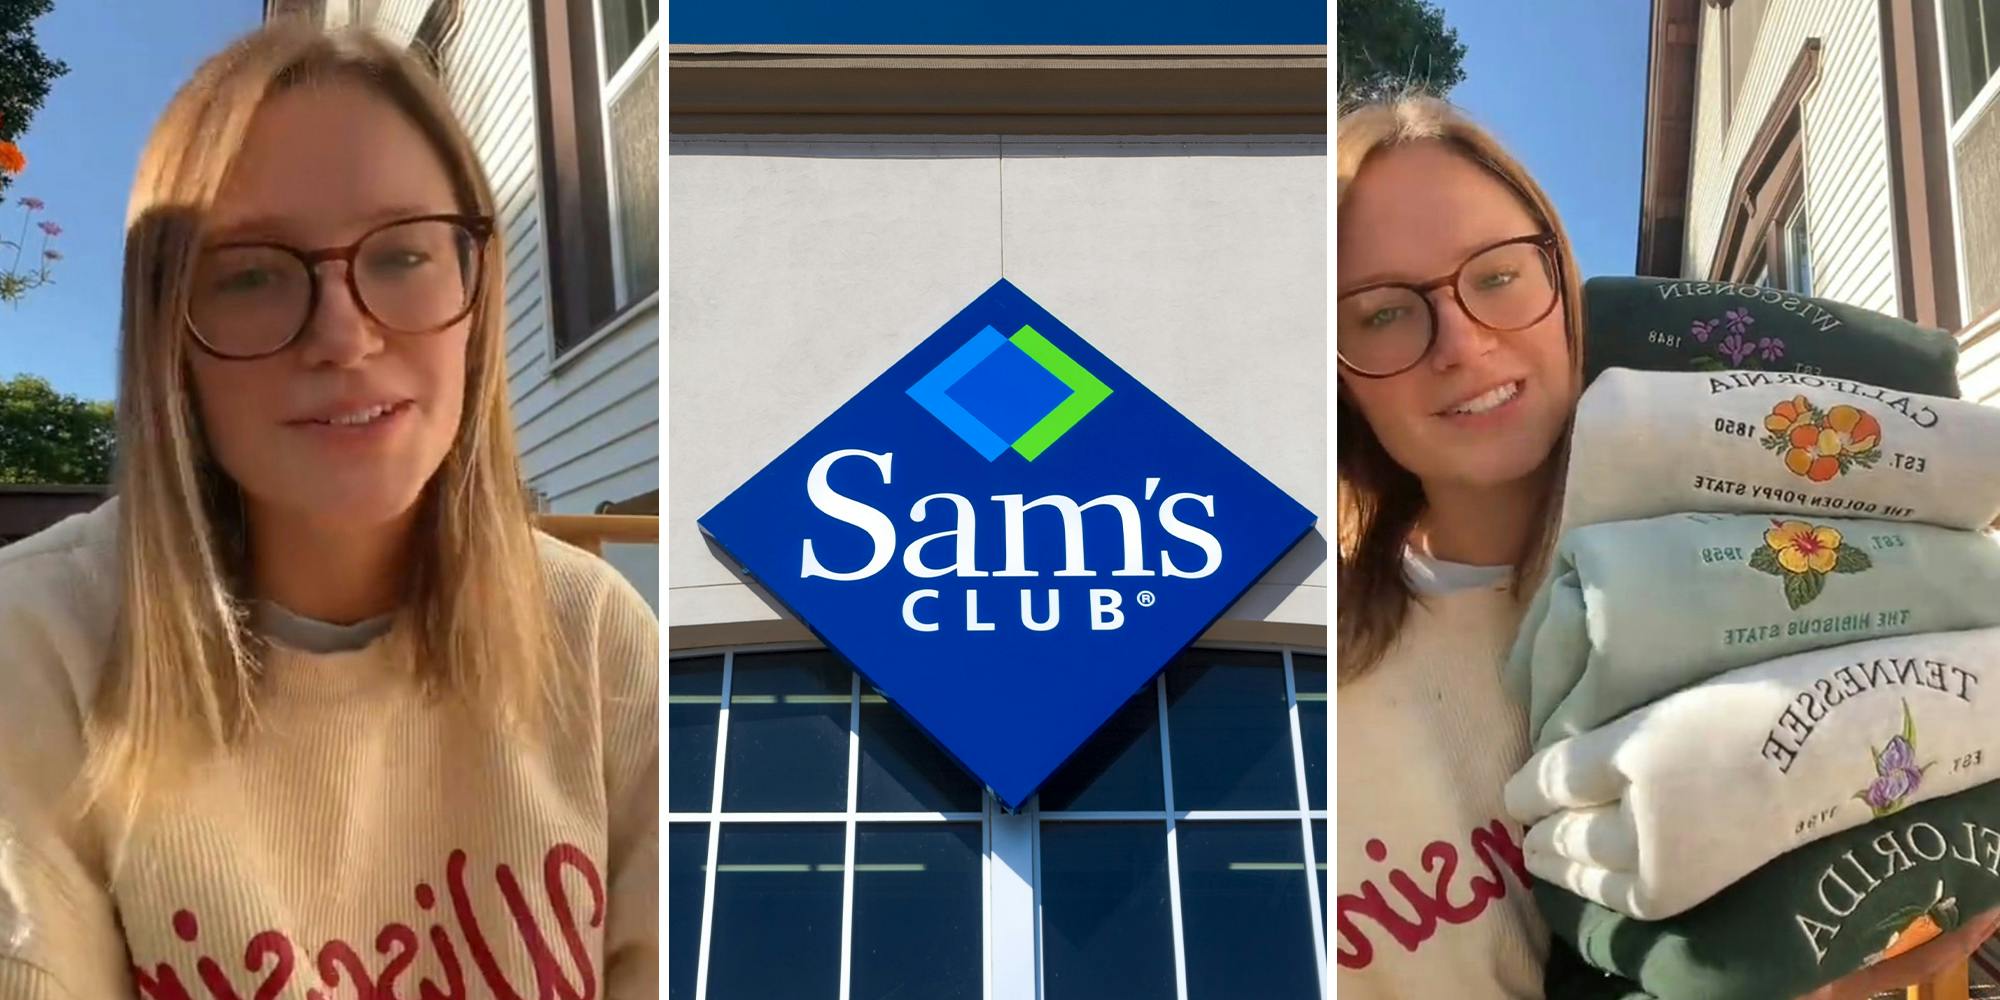 Small business owner says Sam’s Club ‘knocked off’ her design for $15 sweatshirt